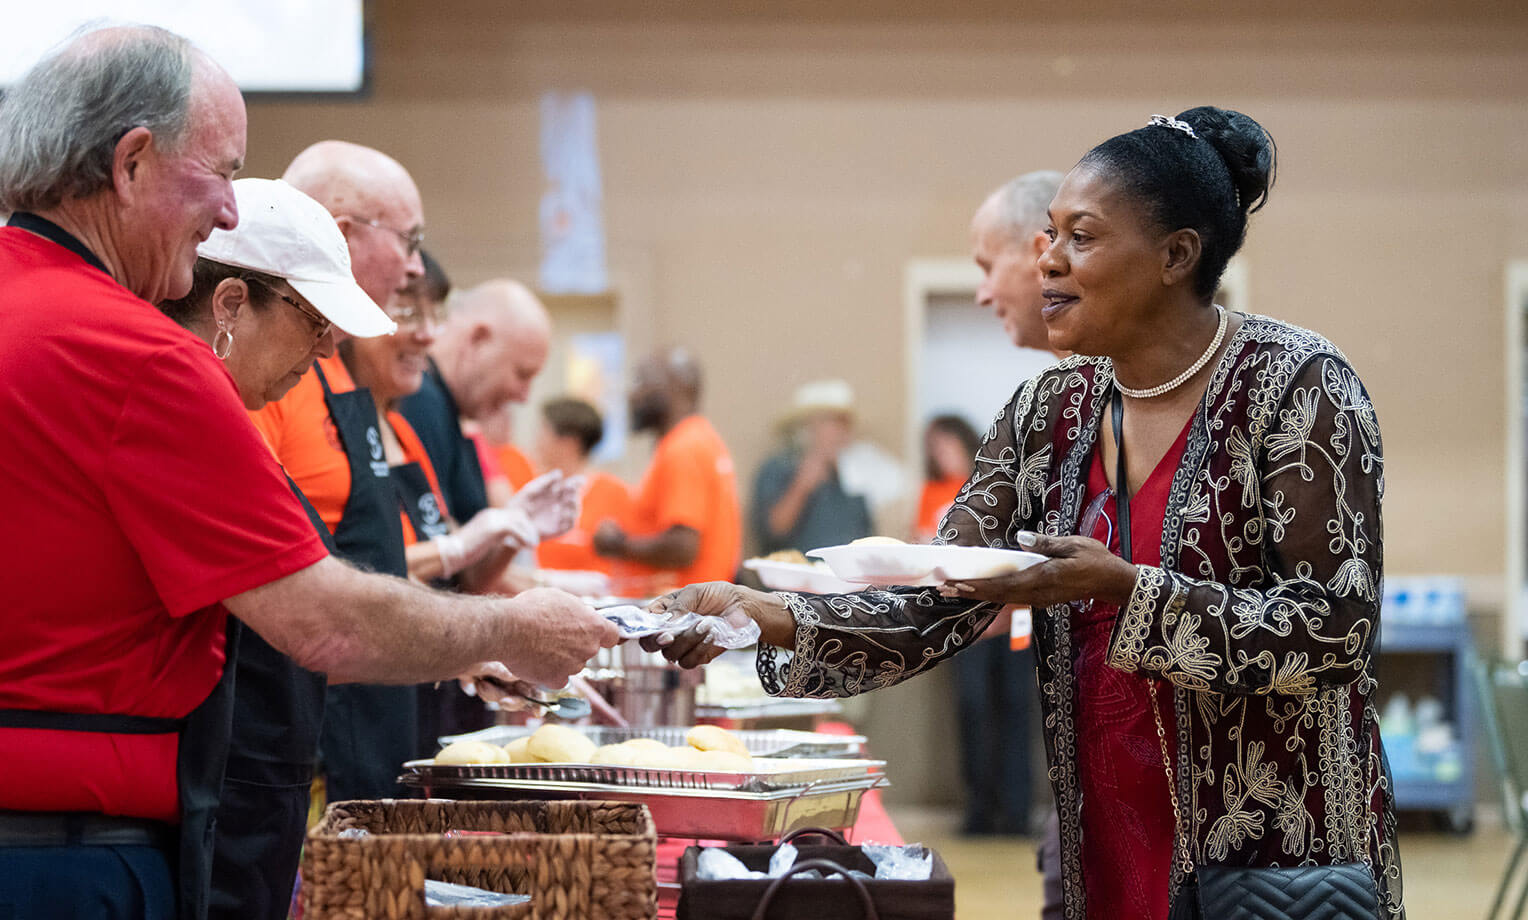 Residents were served a hearty meal from Mission BBQ and Samaritan's Purse.